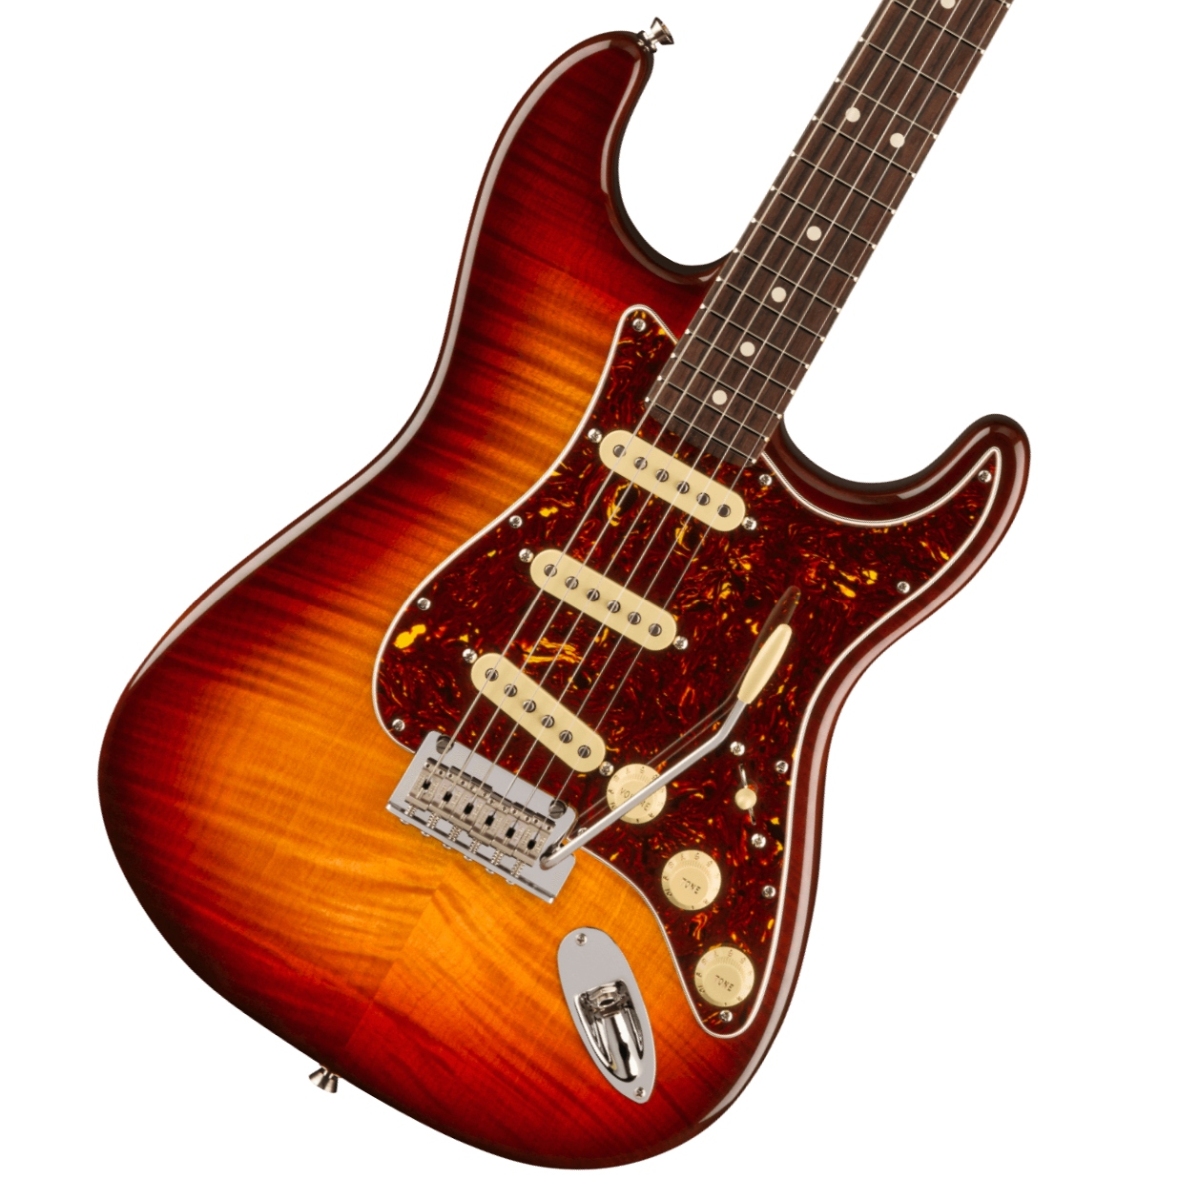 70th Anniversary American Professional II Stratocaster,Rosewood Fingerboard, Comet Burst